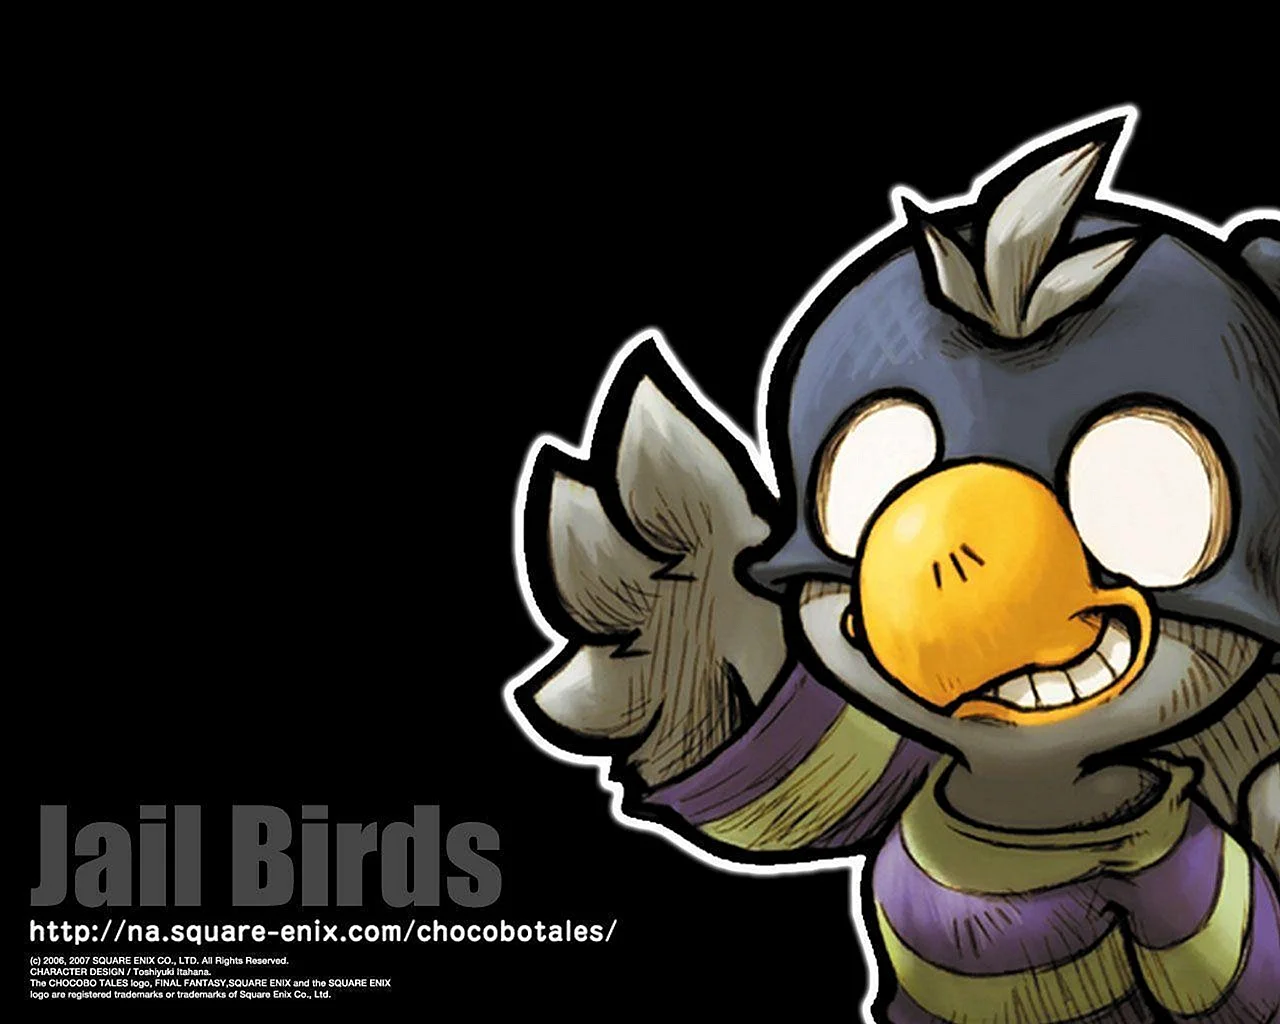 Final Fantasy Fables - Chocobo Tales Wallpaper